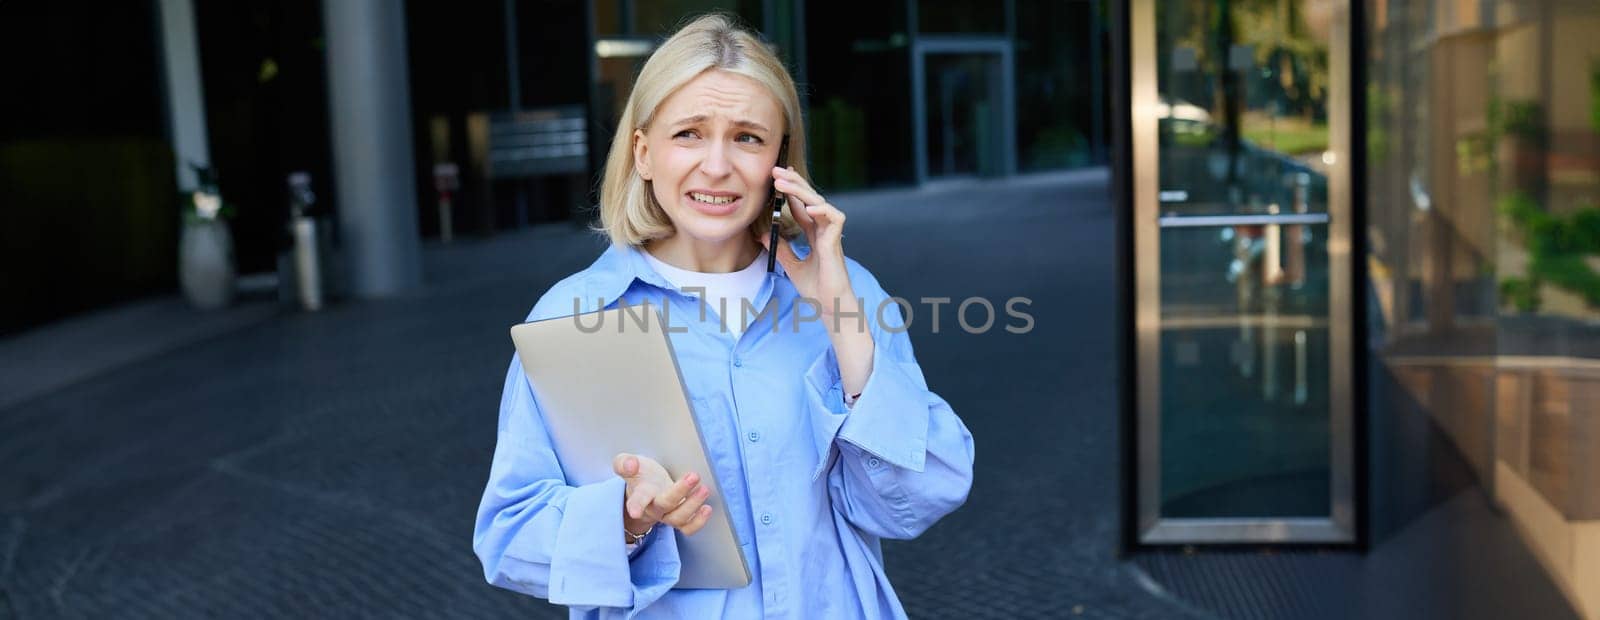 Image of young smiling woman, working in company, standing near office with laptop, answers phone call, chatting with someone.